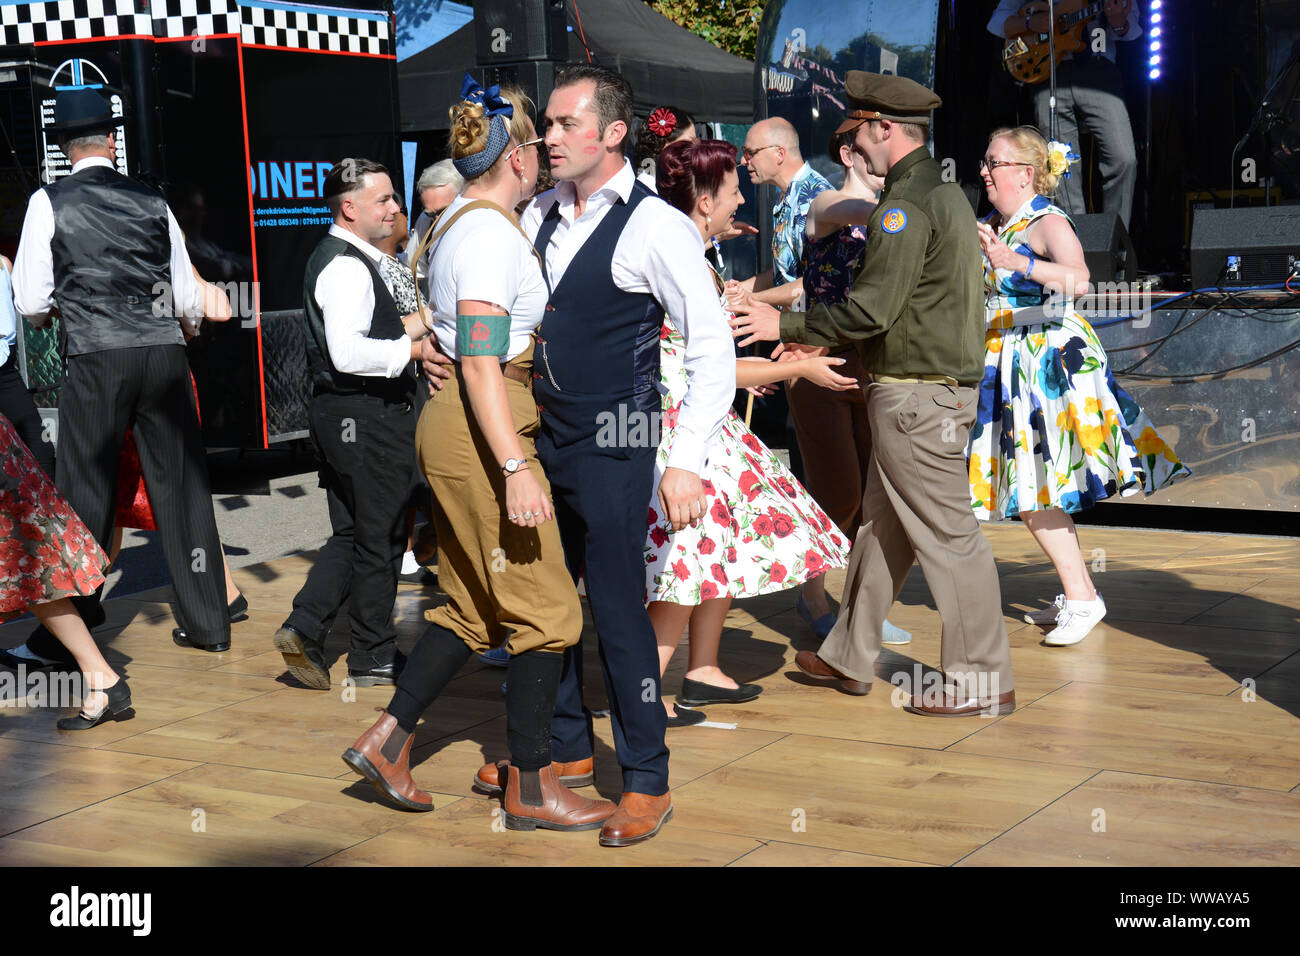 Goodwood Revival 13th September 2019 - Dancing to music from the 1940' and 1950's Stock Photo